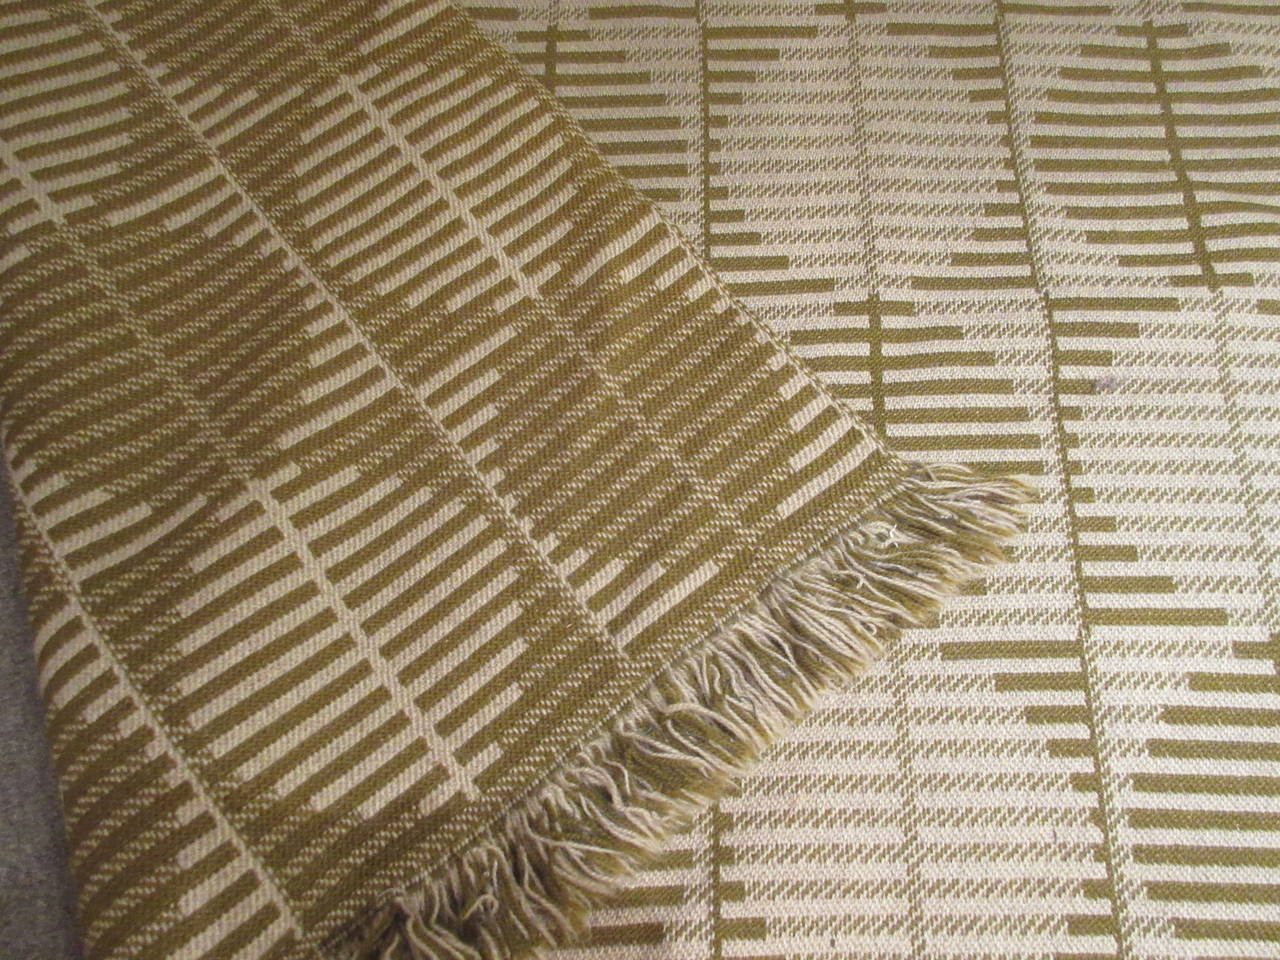 Reversible rug of off-white, greige and olive coloring. Just cleaned and perfect.